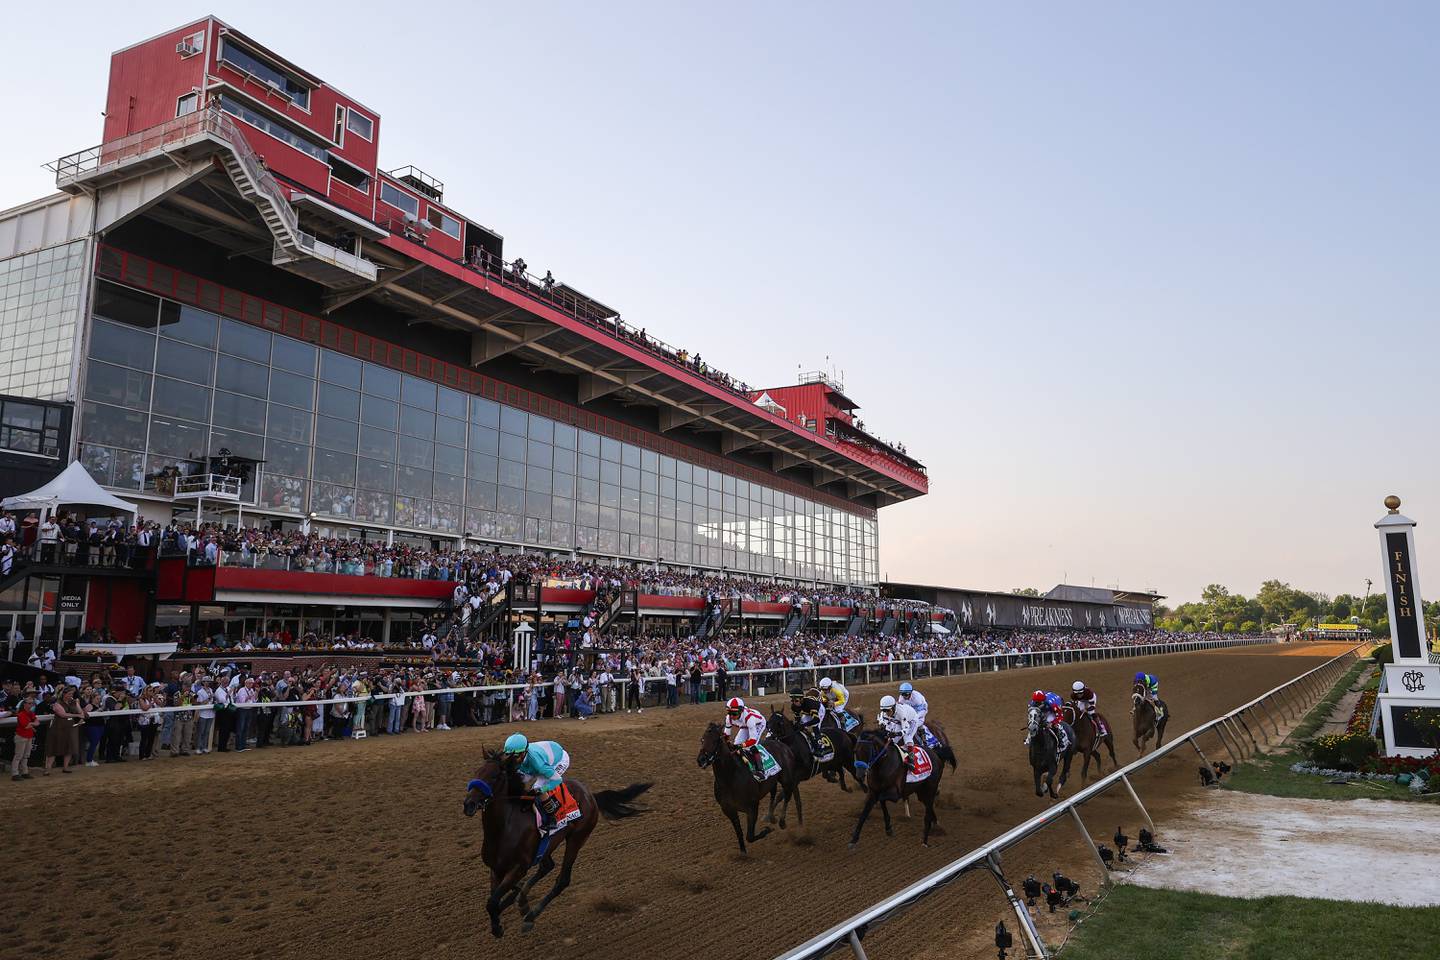 Jockey Jose Ortiz #5 riding Early Voting and the field make the first pass into the first turn during the 147th Running of the Preakness Stakes at Pimlico Race Course on May 21, 2022 in Baltimore, Maryland.